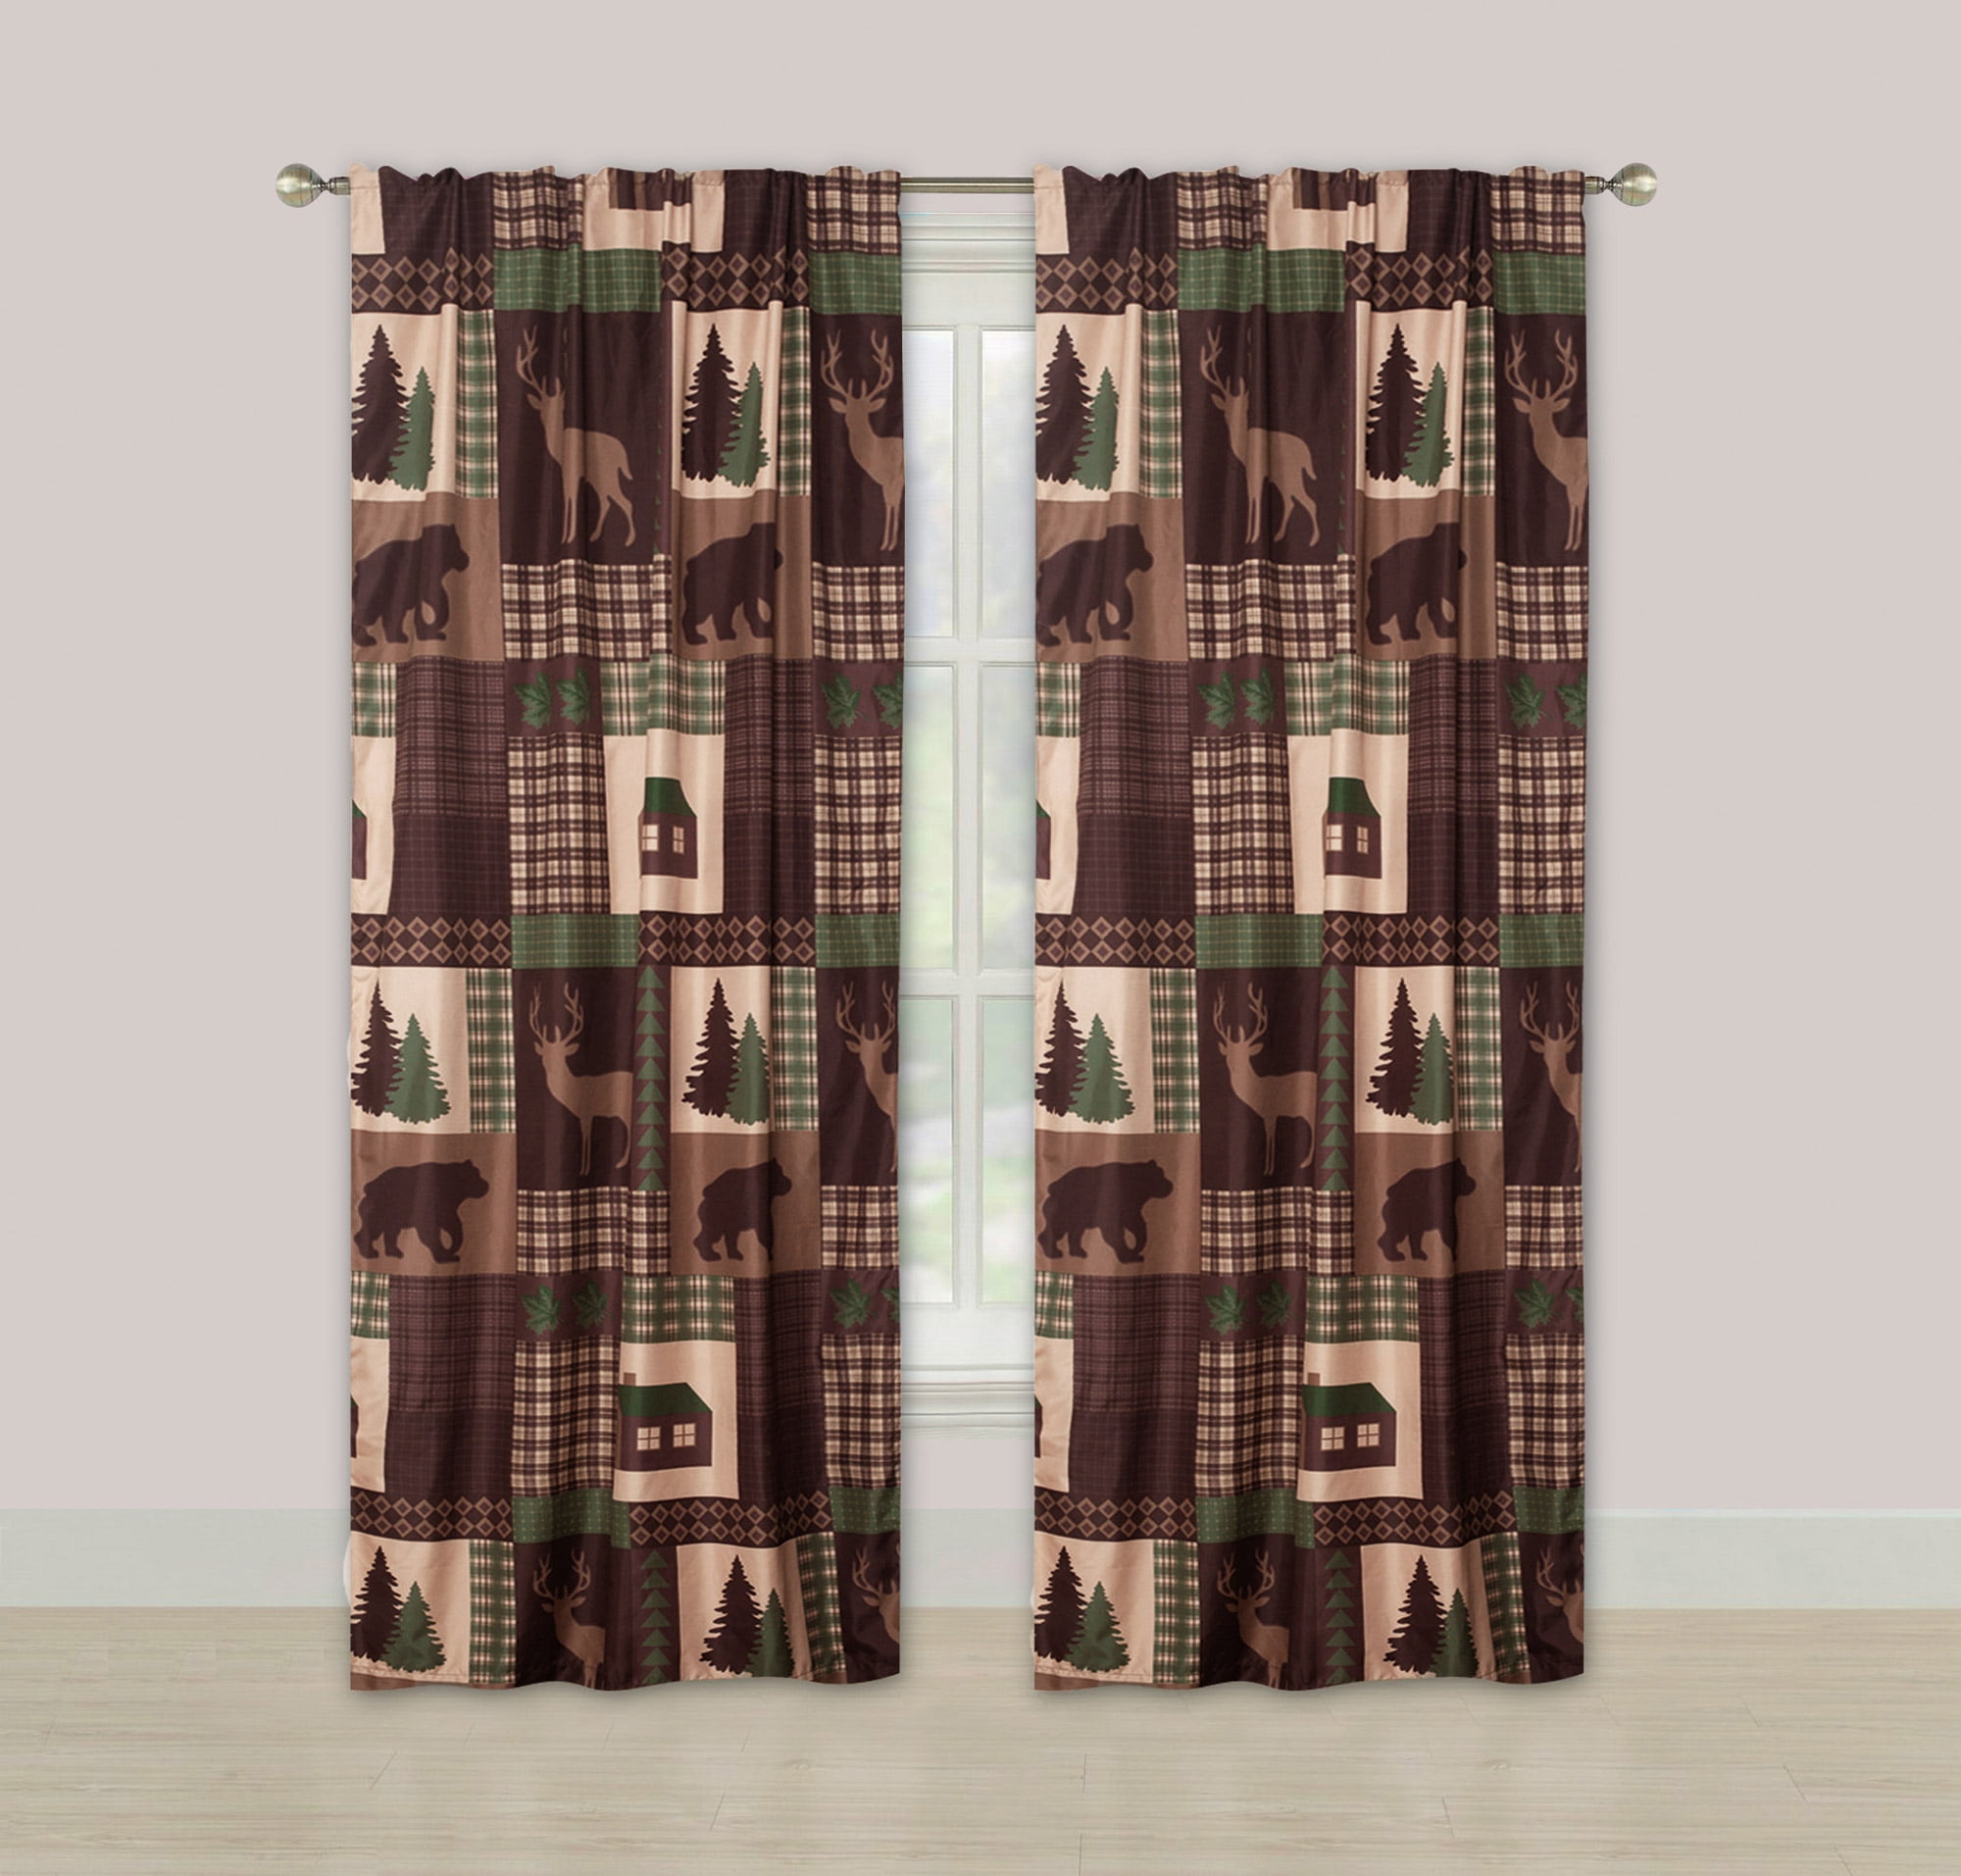 New Primitive Rustic Lodge Green TEA CABIN CURTAINS Valance Swags Drapes CHOICE 